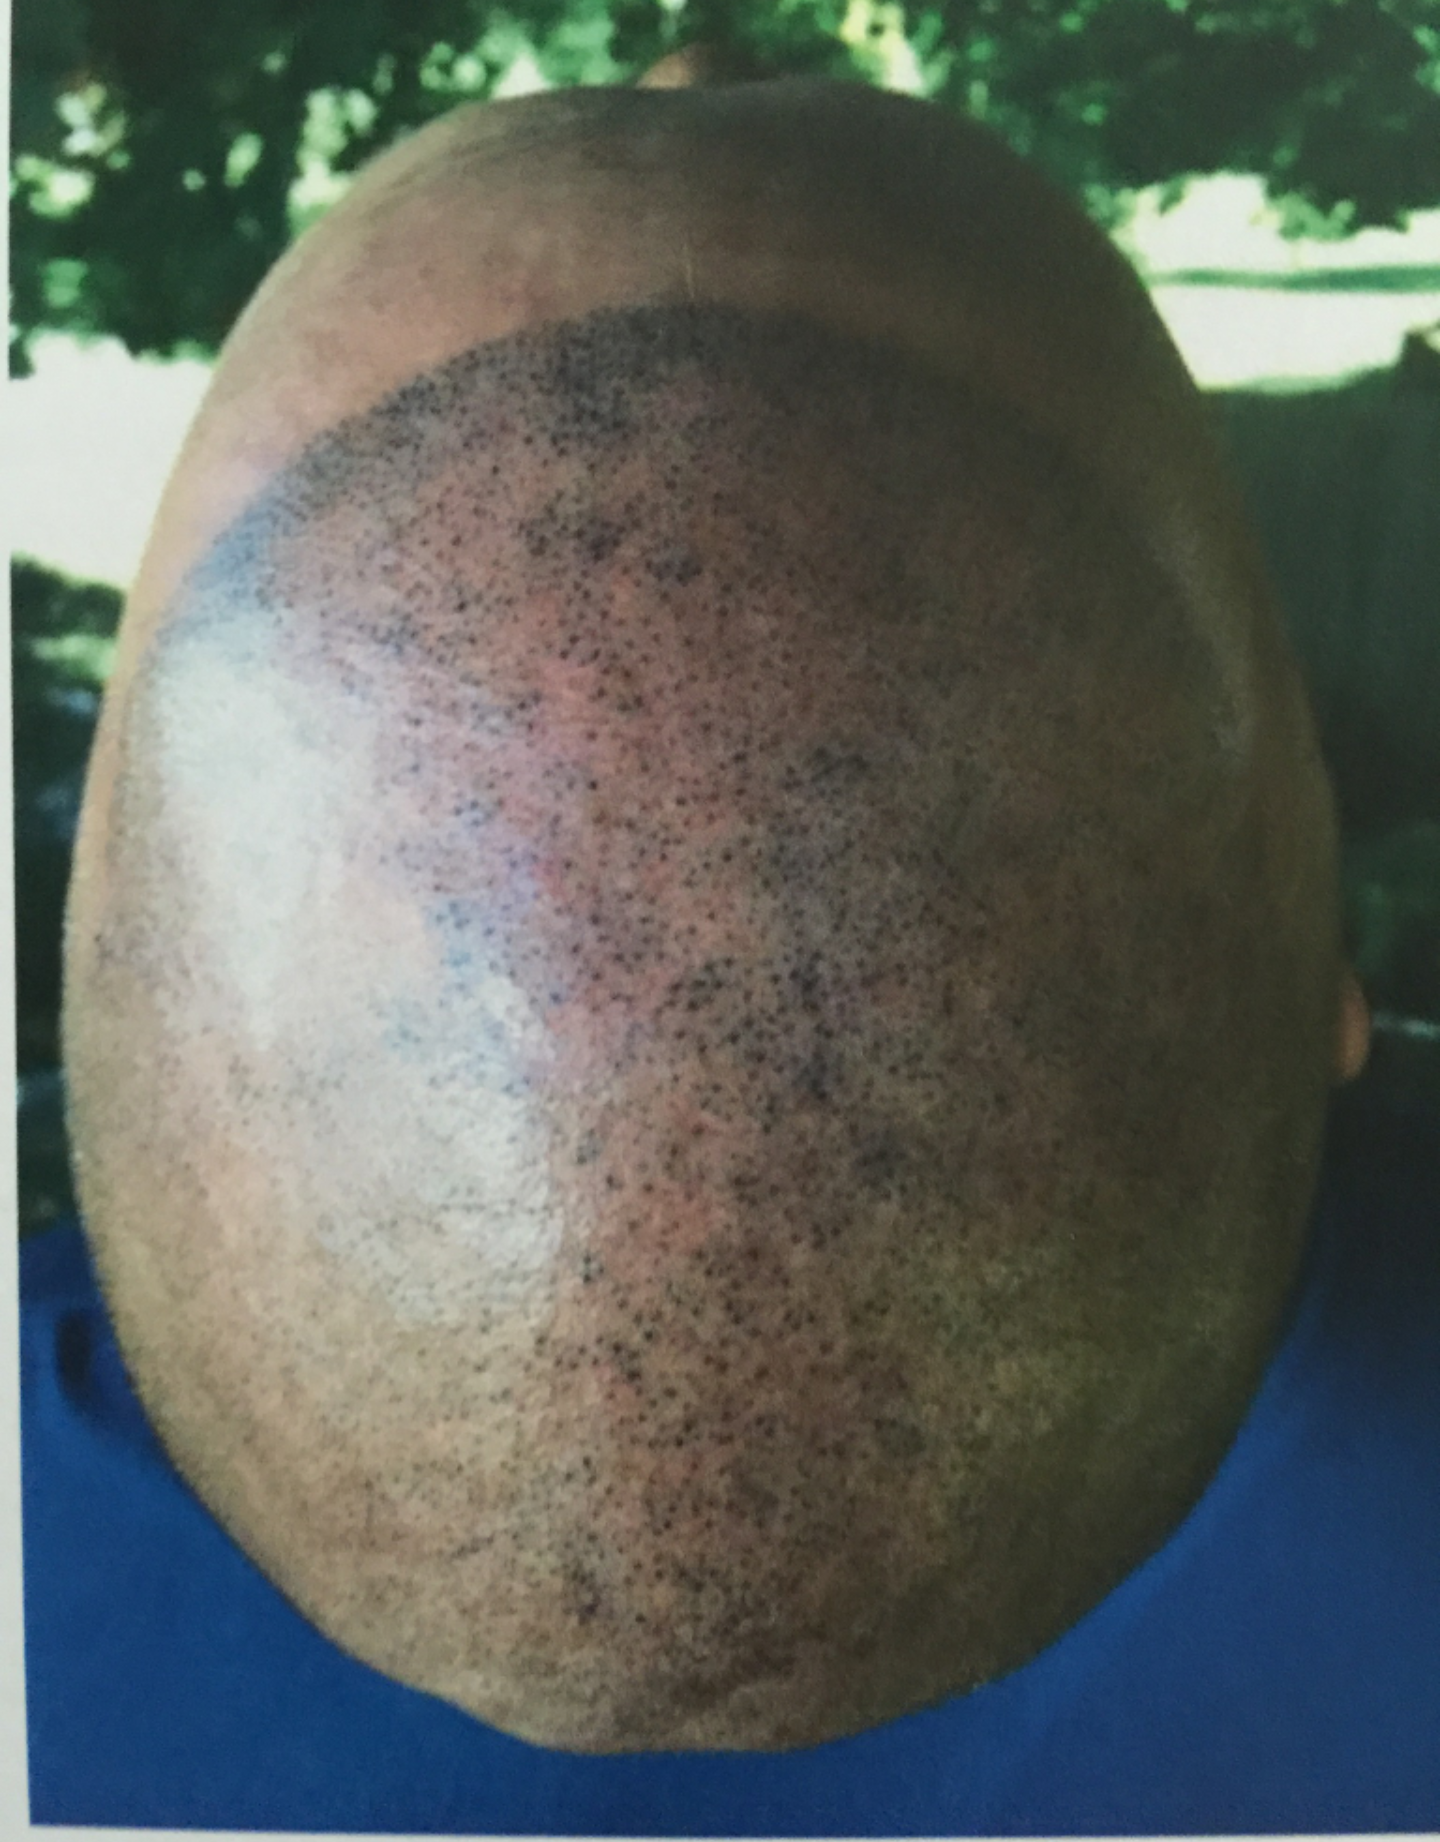 Post 7 to 8 days after treatment